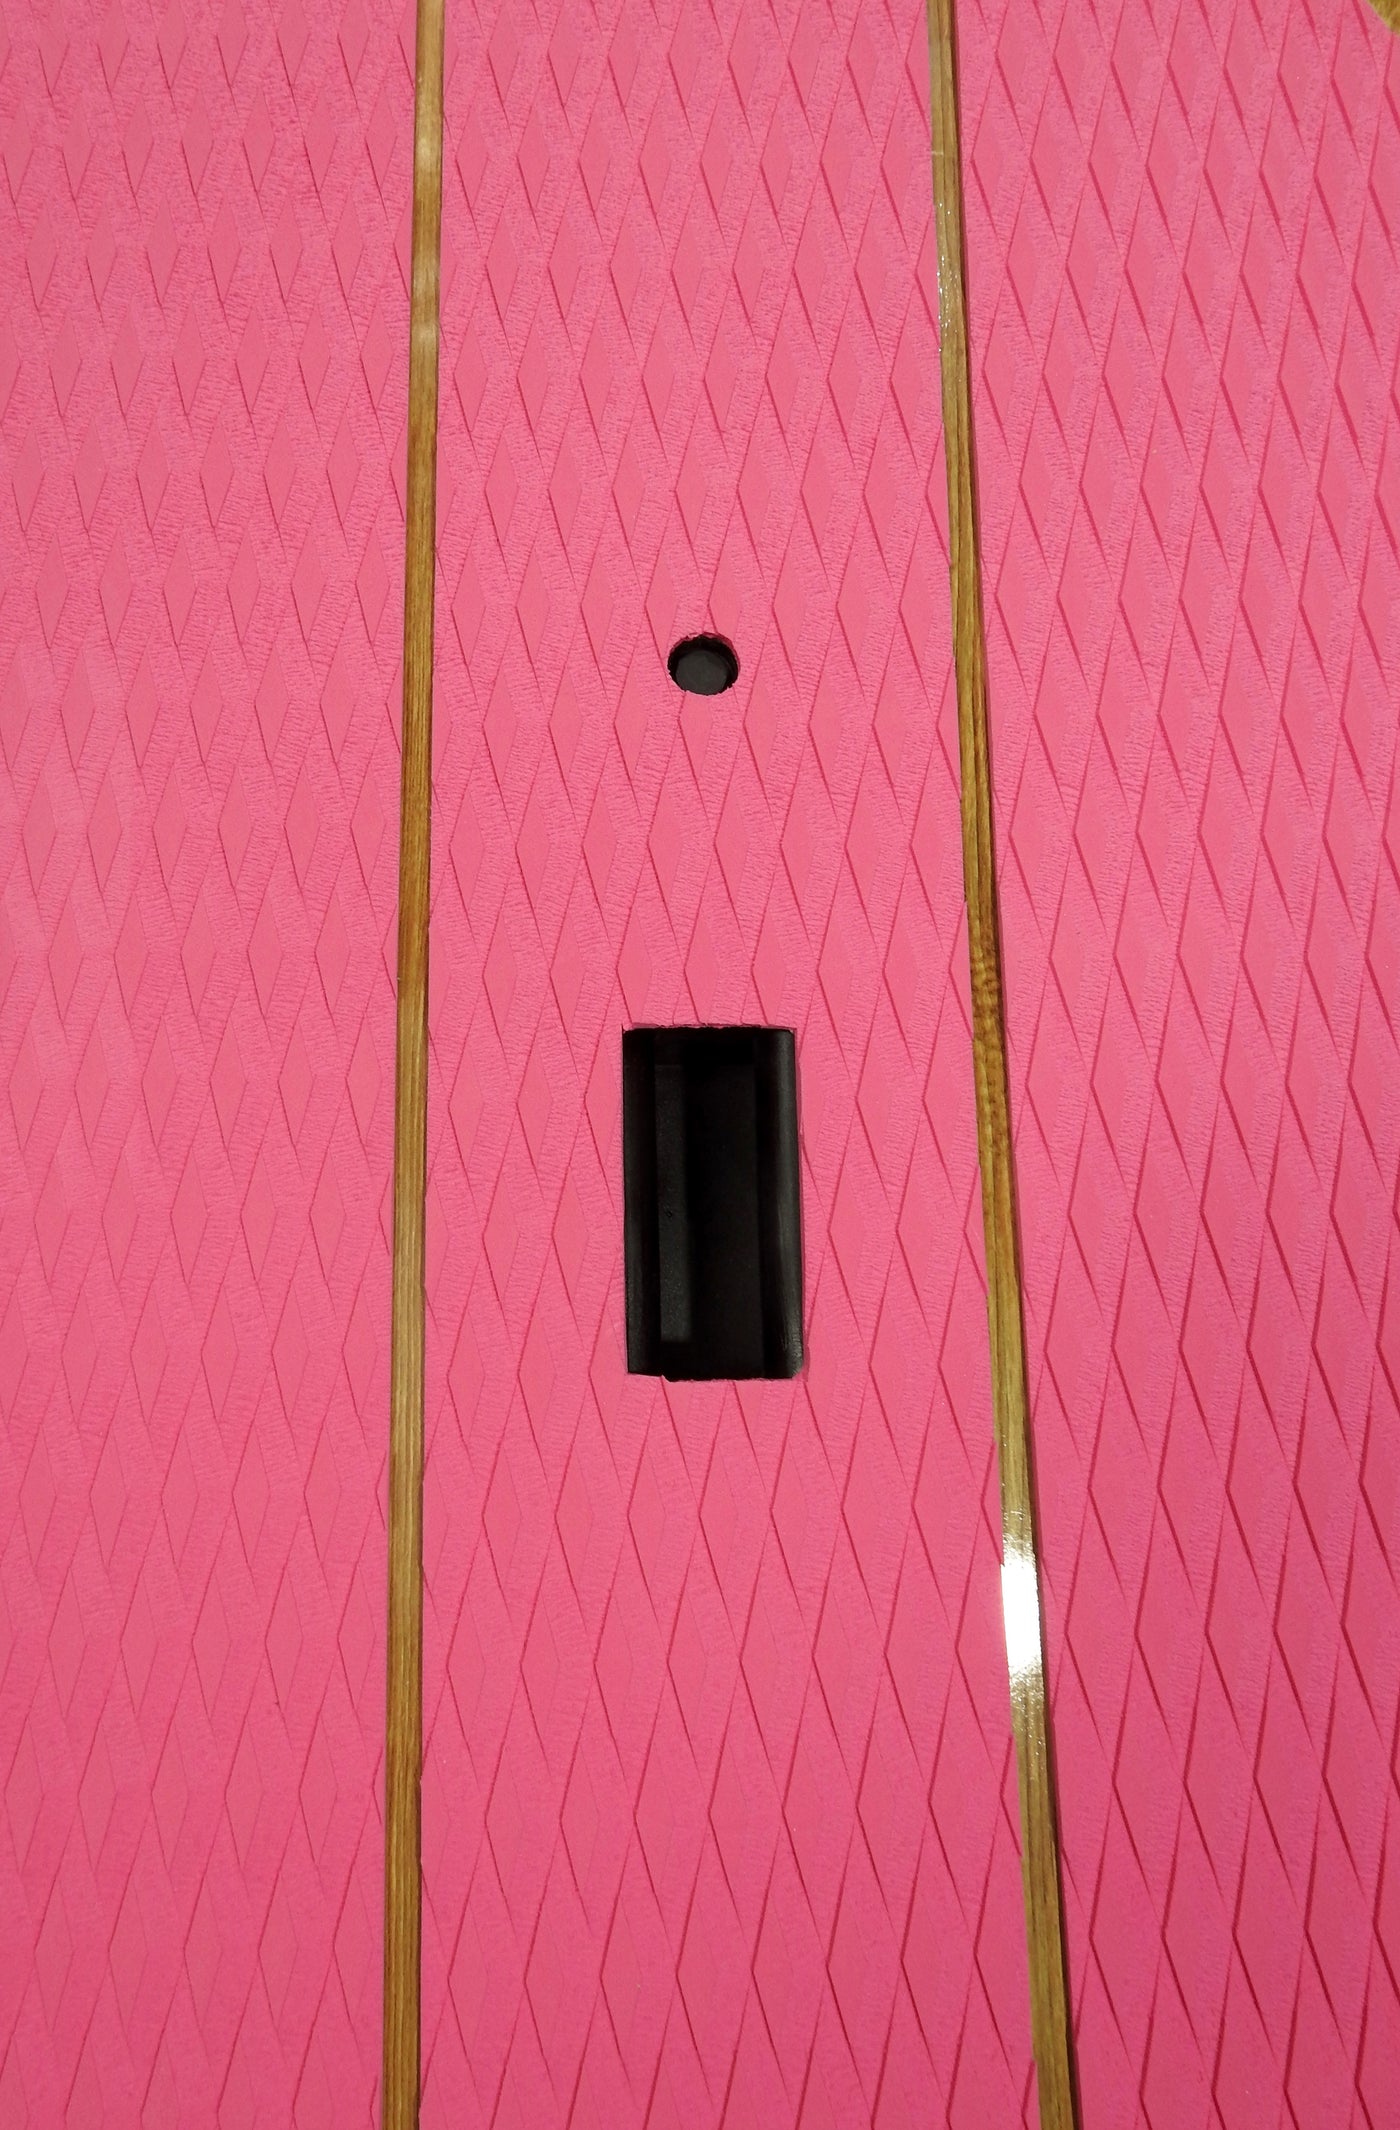 10’6” x 32” Timber Look Pink Thermo Mould Alleydesigns SUP - Alleydesigns  Pty Ltd                                             ABN: 44165571264